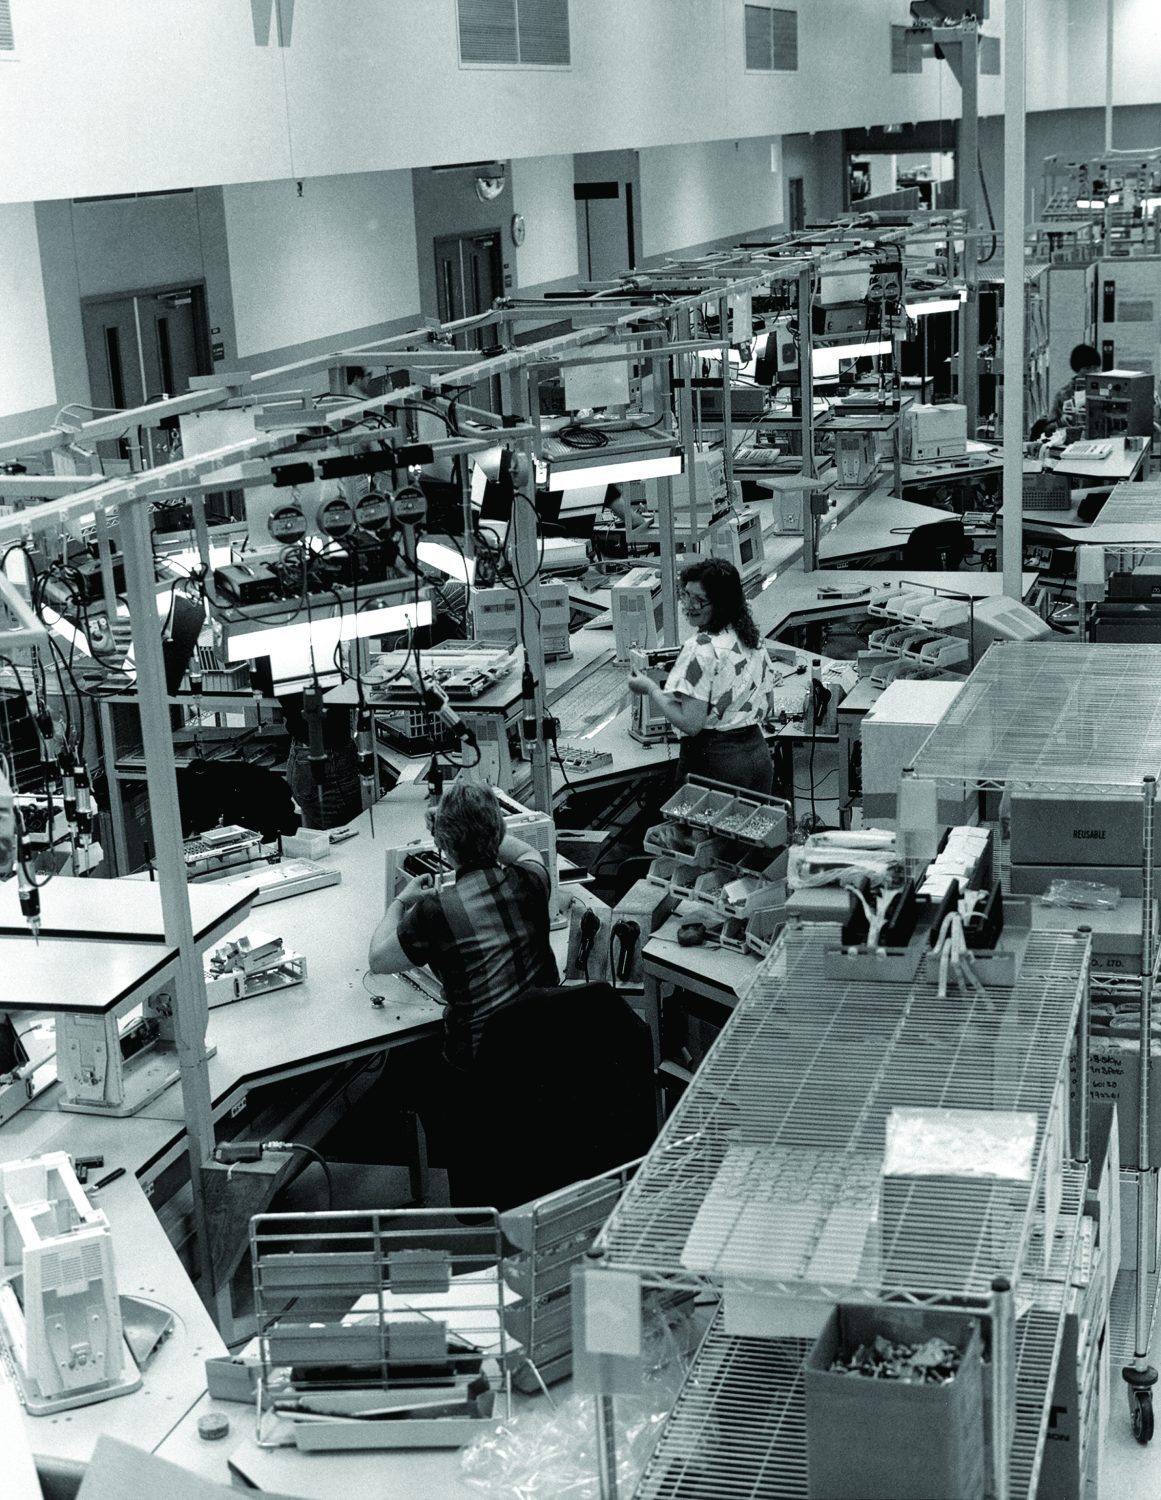 Two women working on the production line assembling Hewlett-Packard Integral luggable PCs in 1985.